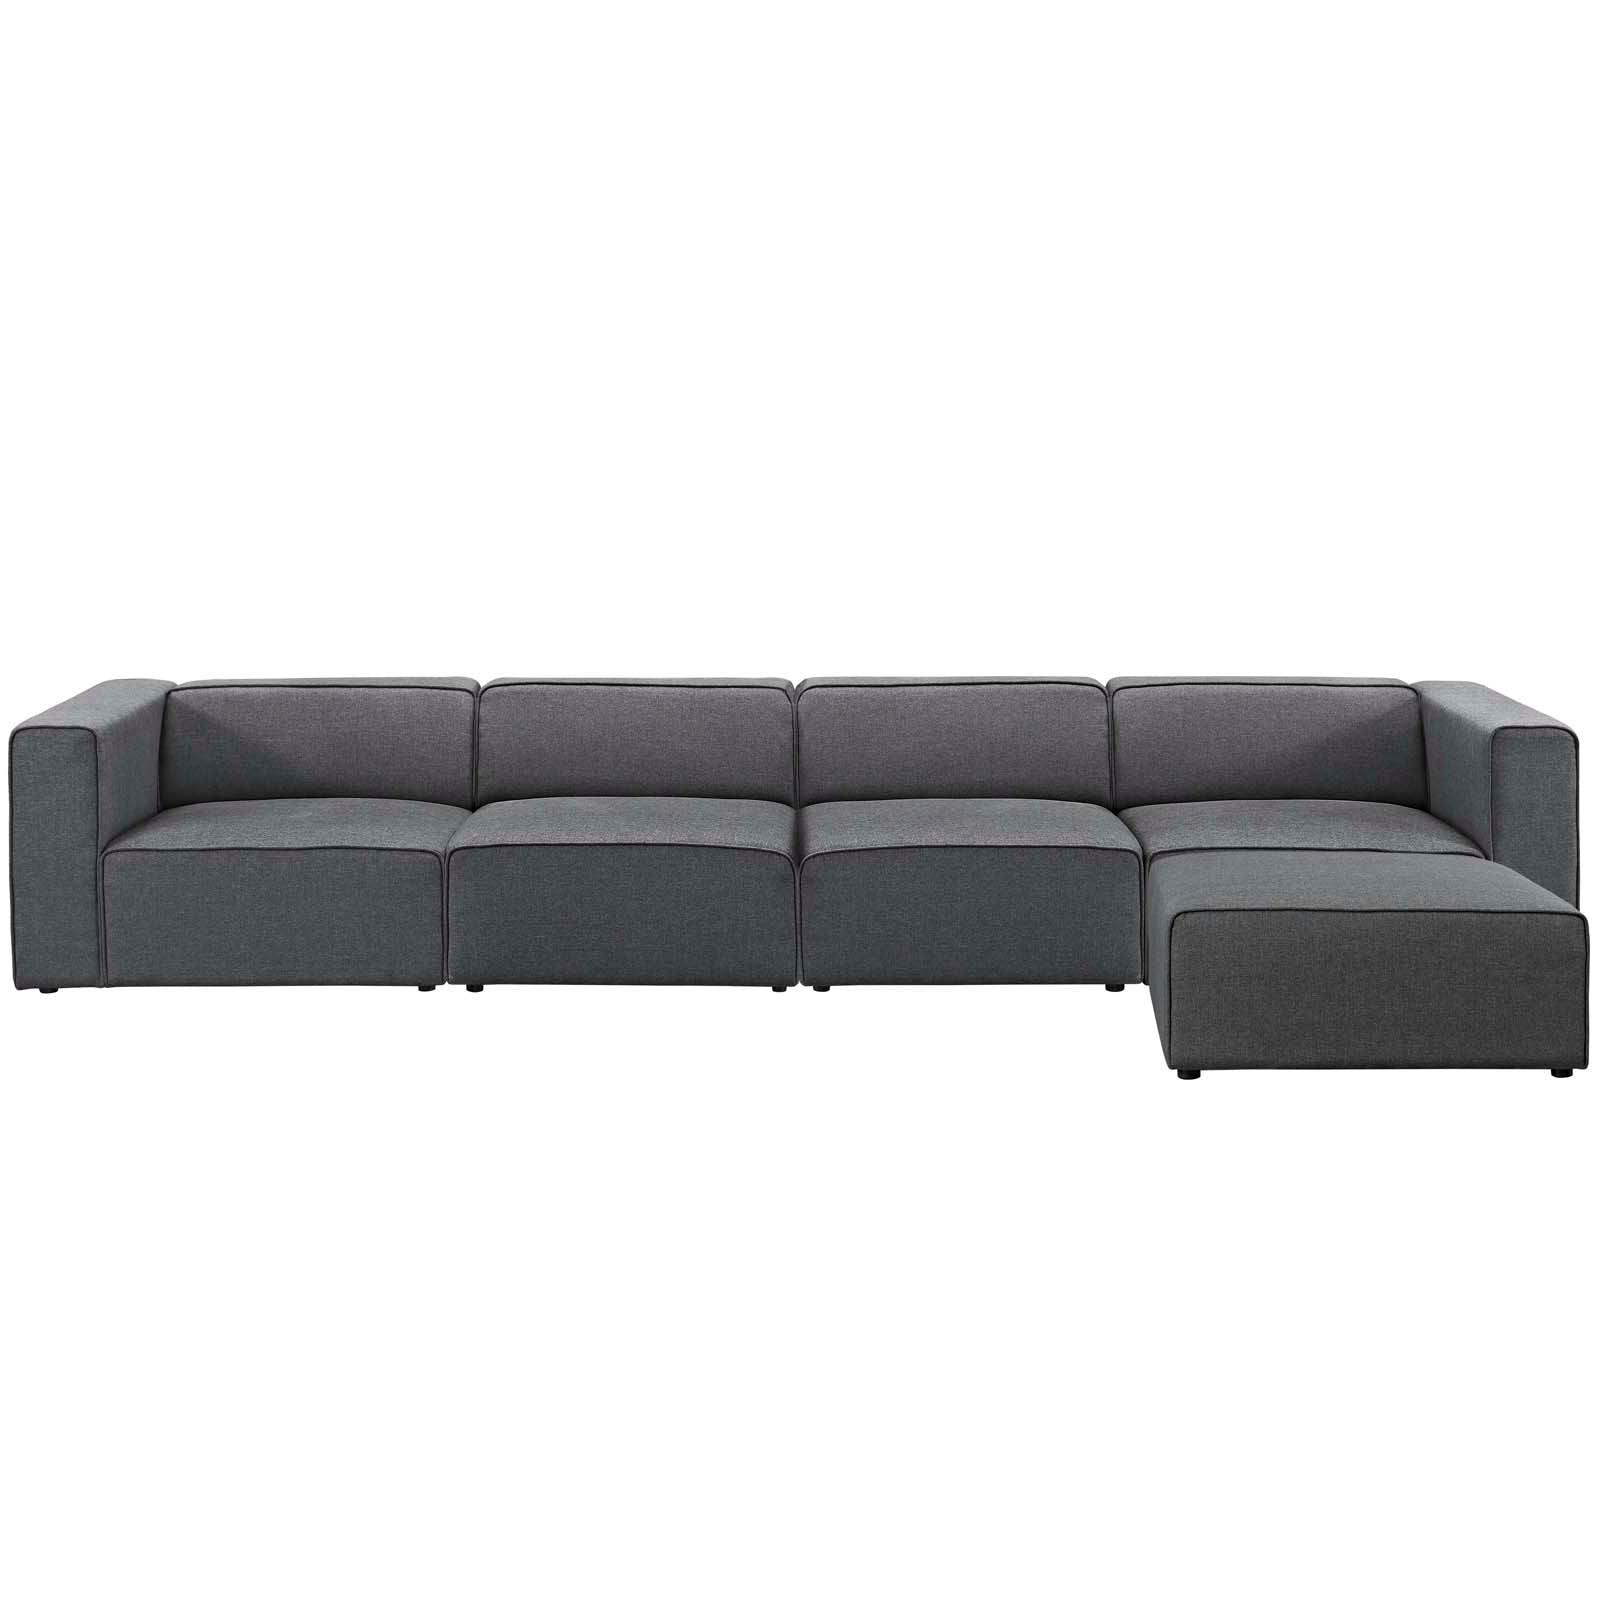 Modway Sectional Sofas - Mingle 5 Piece Upholstered Fabric Sectional Sofa Set Gray